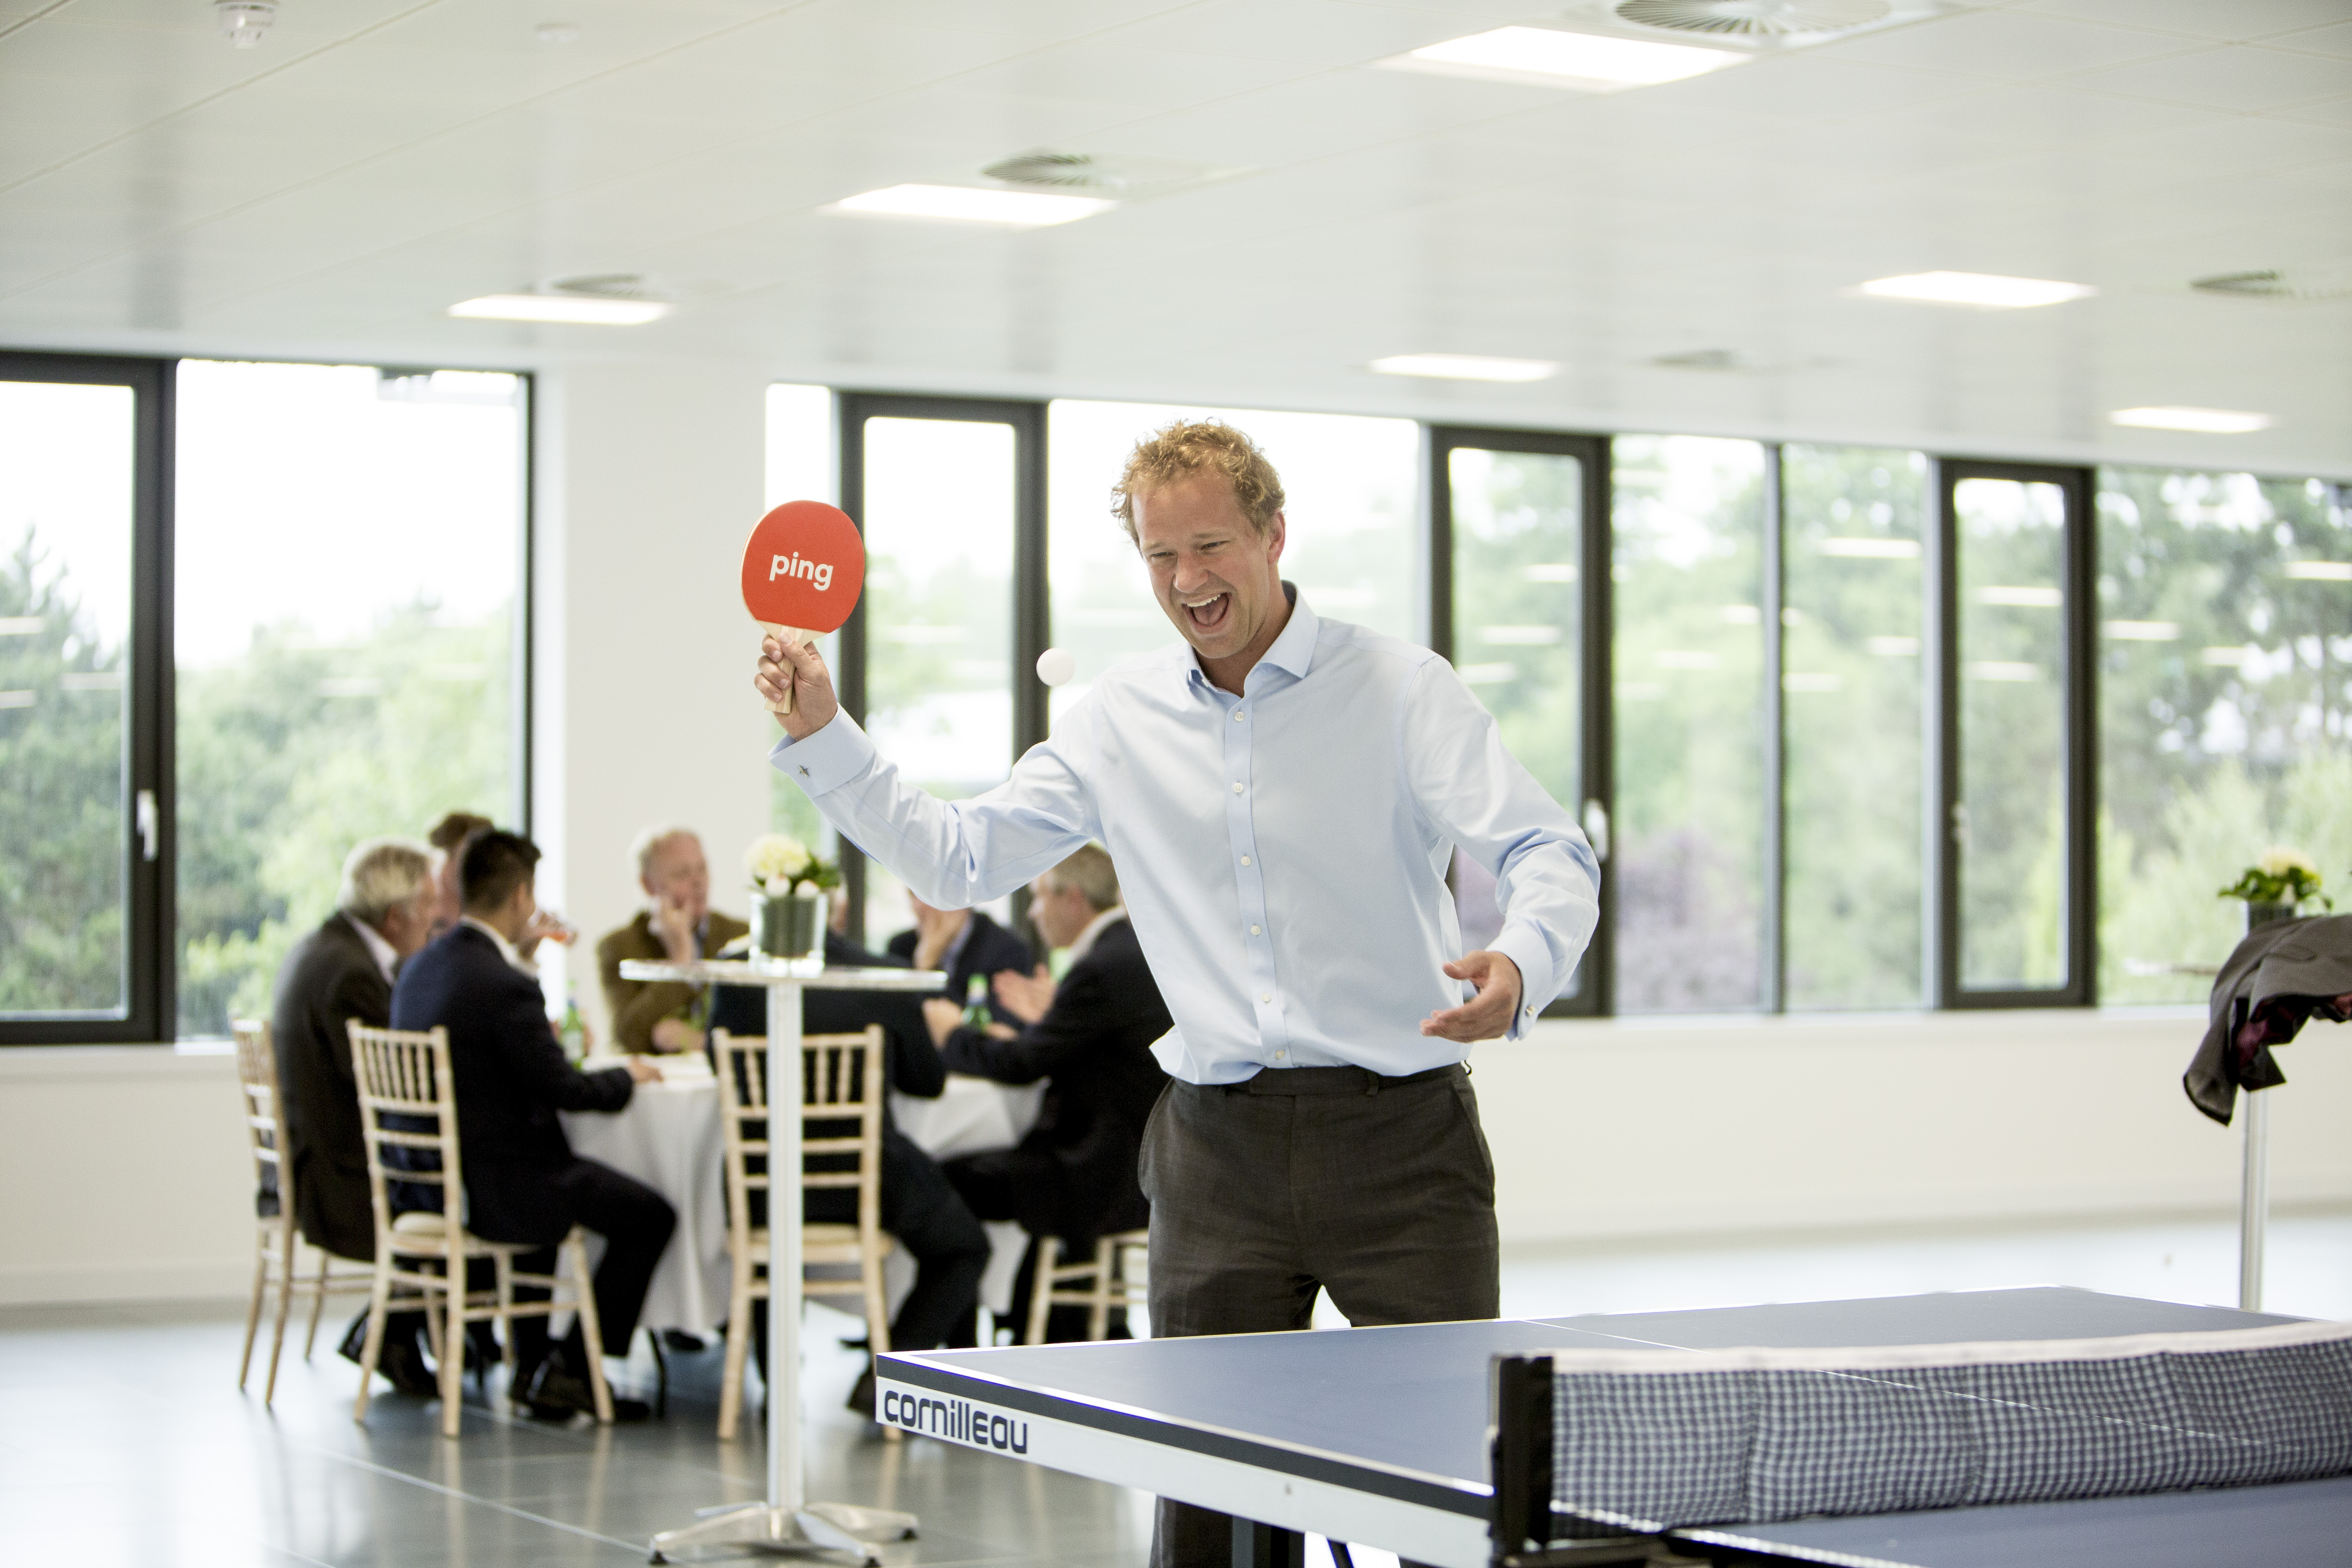 Croxley Park Building Launch | Ping Pong Game